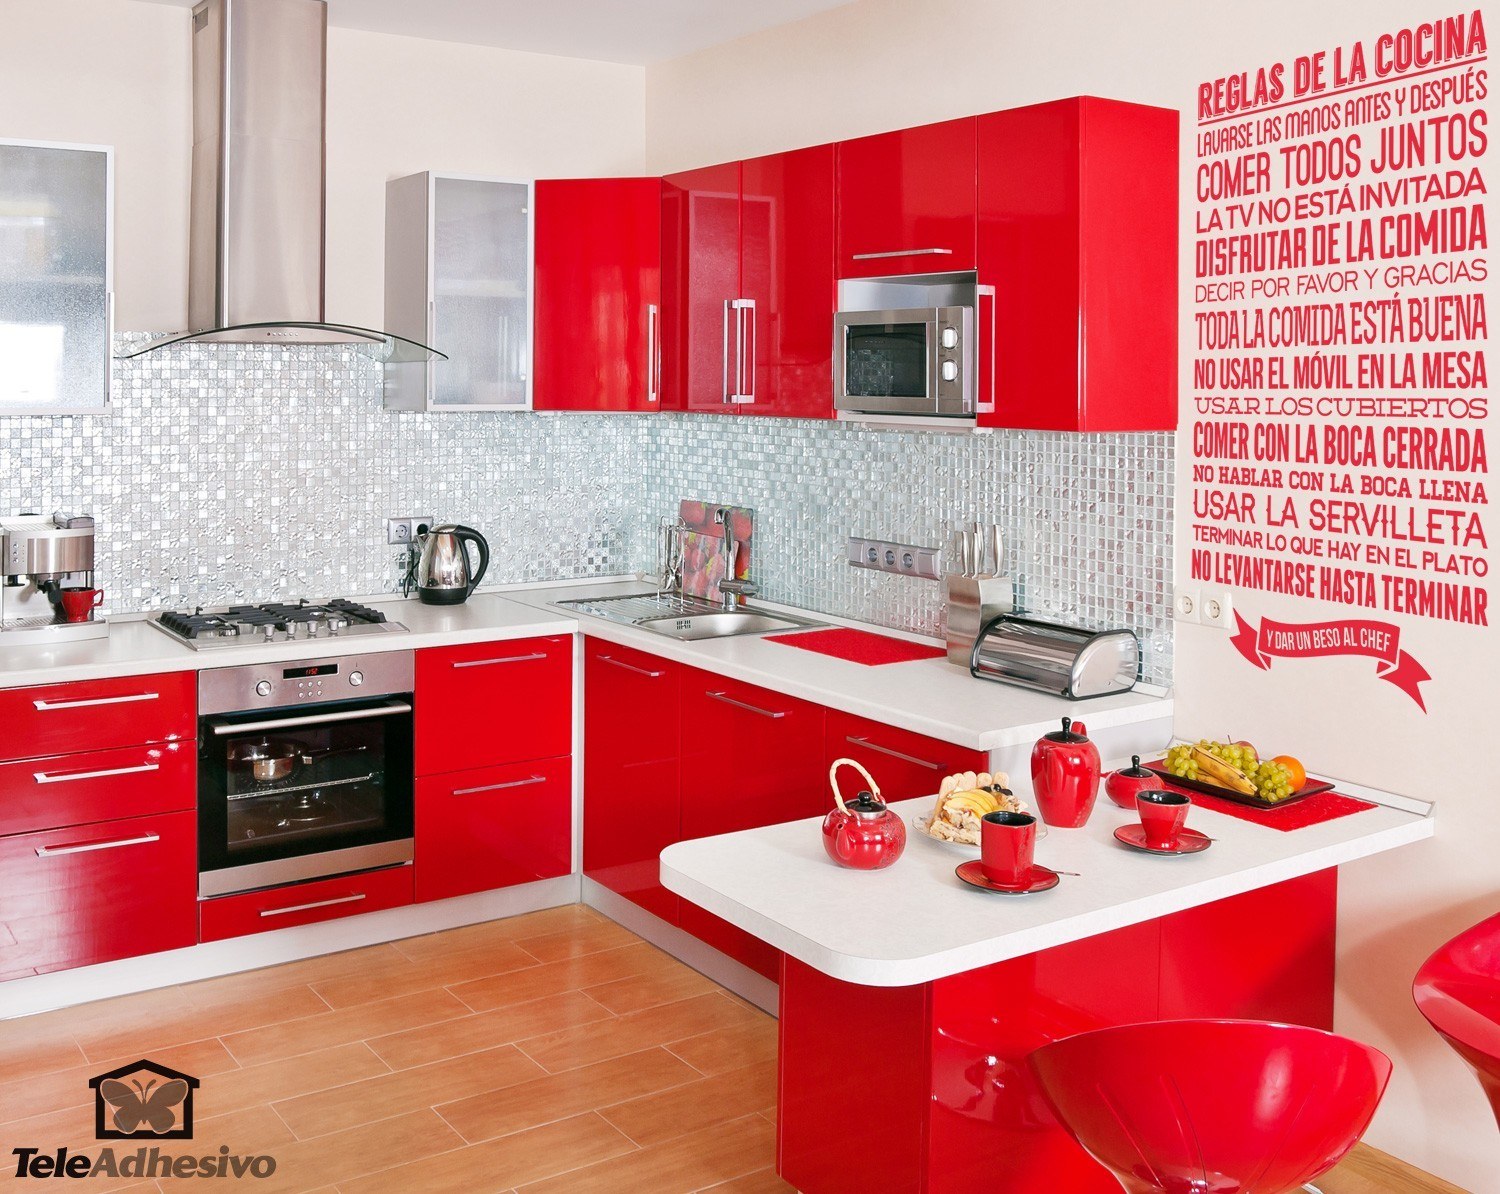 Wall Stickers: kitchen rules - Spanish